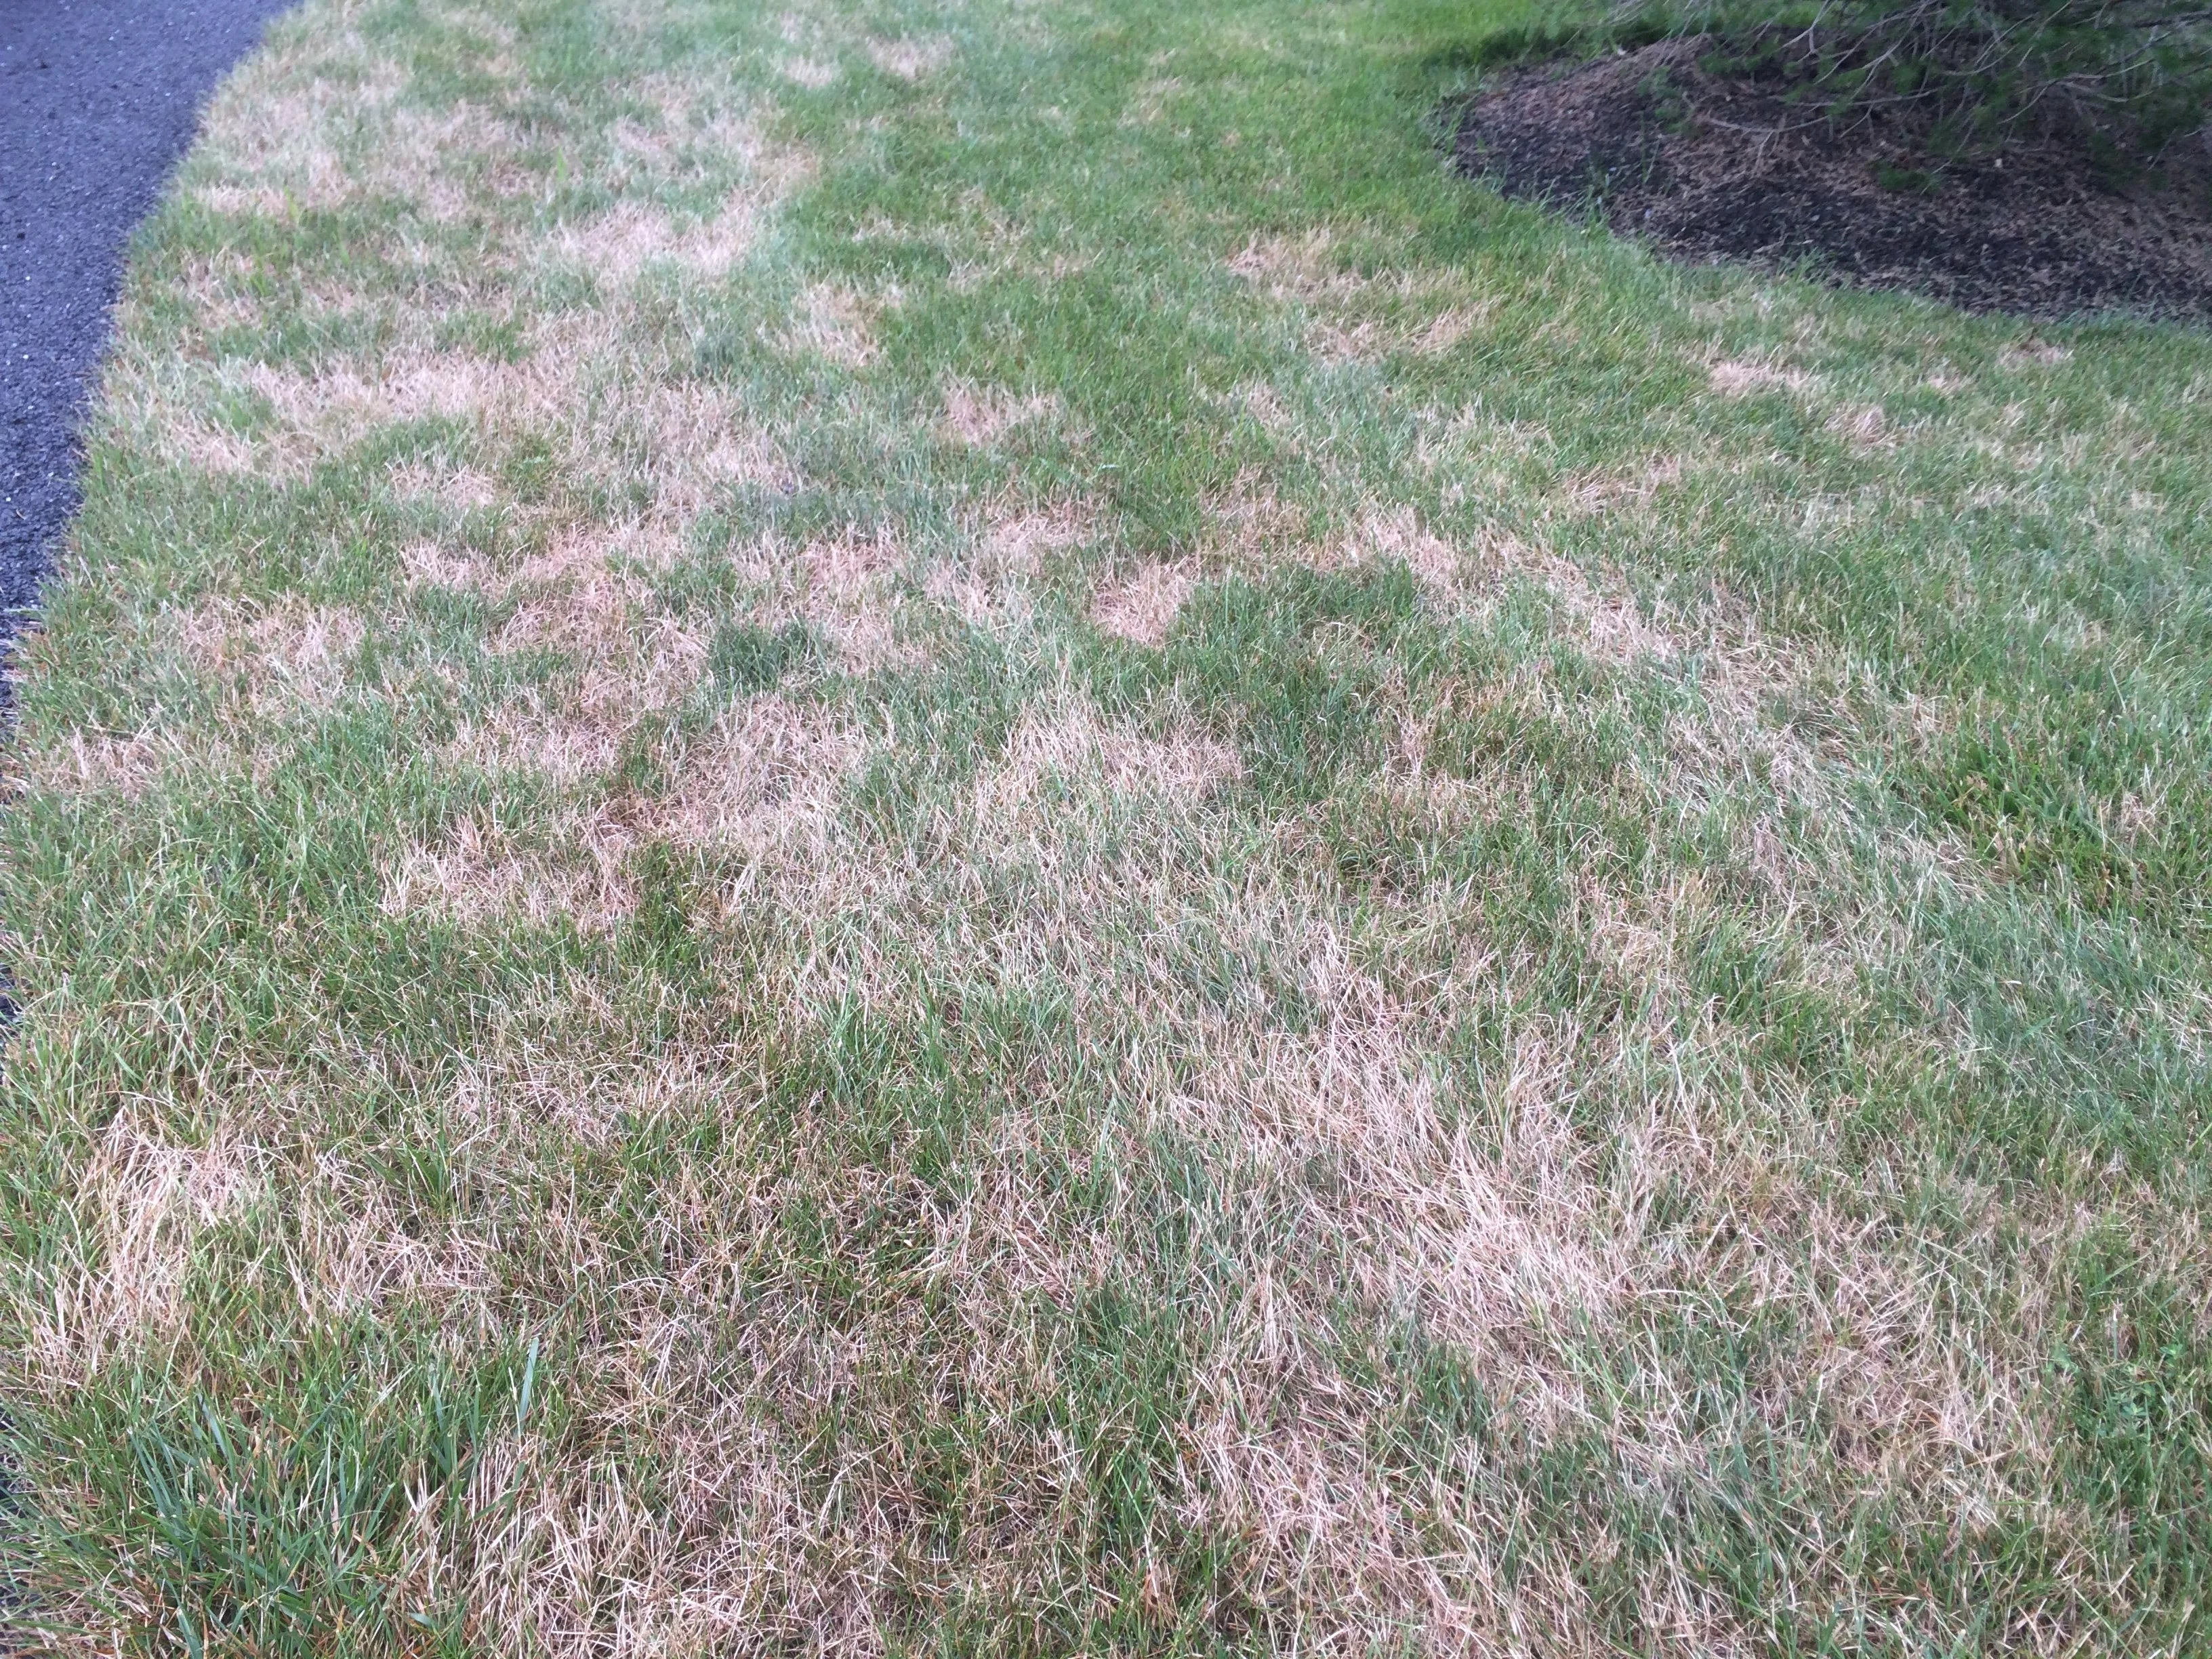 All About Brown Patch Lawn Disease & How to Get Rid of It